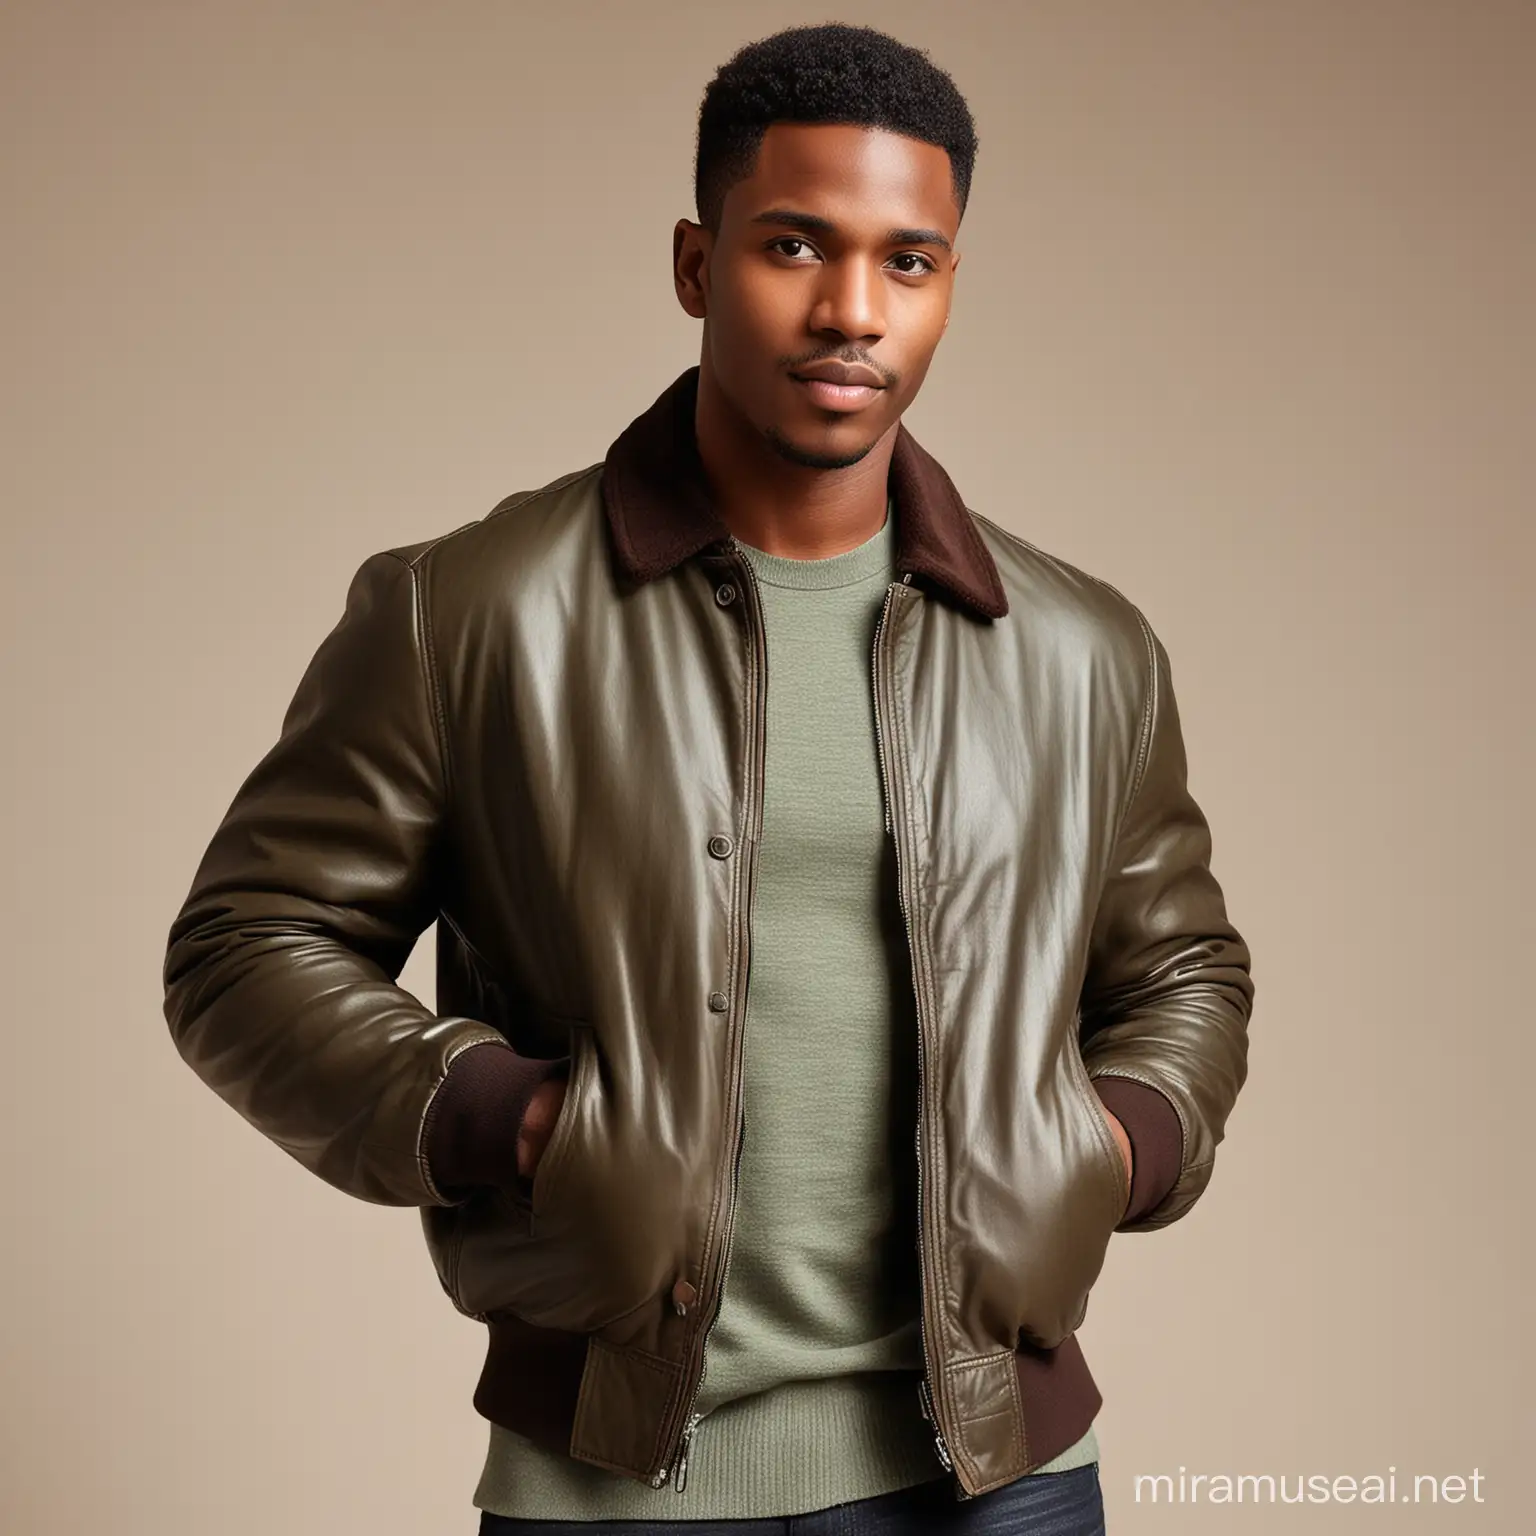 A Handsome black Man wearing a brown and green leather bomber jacket.